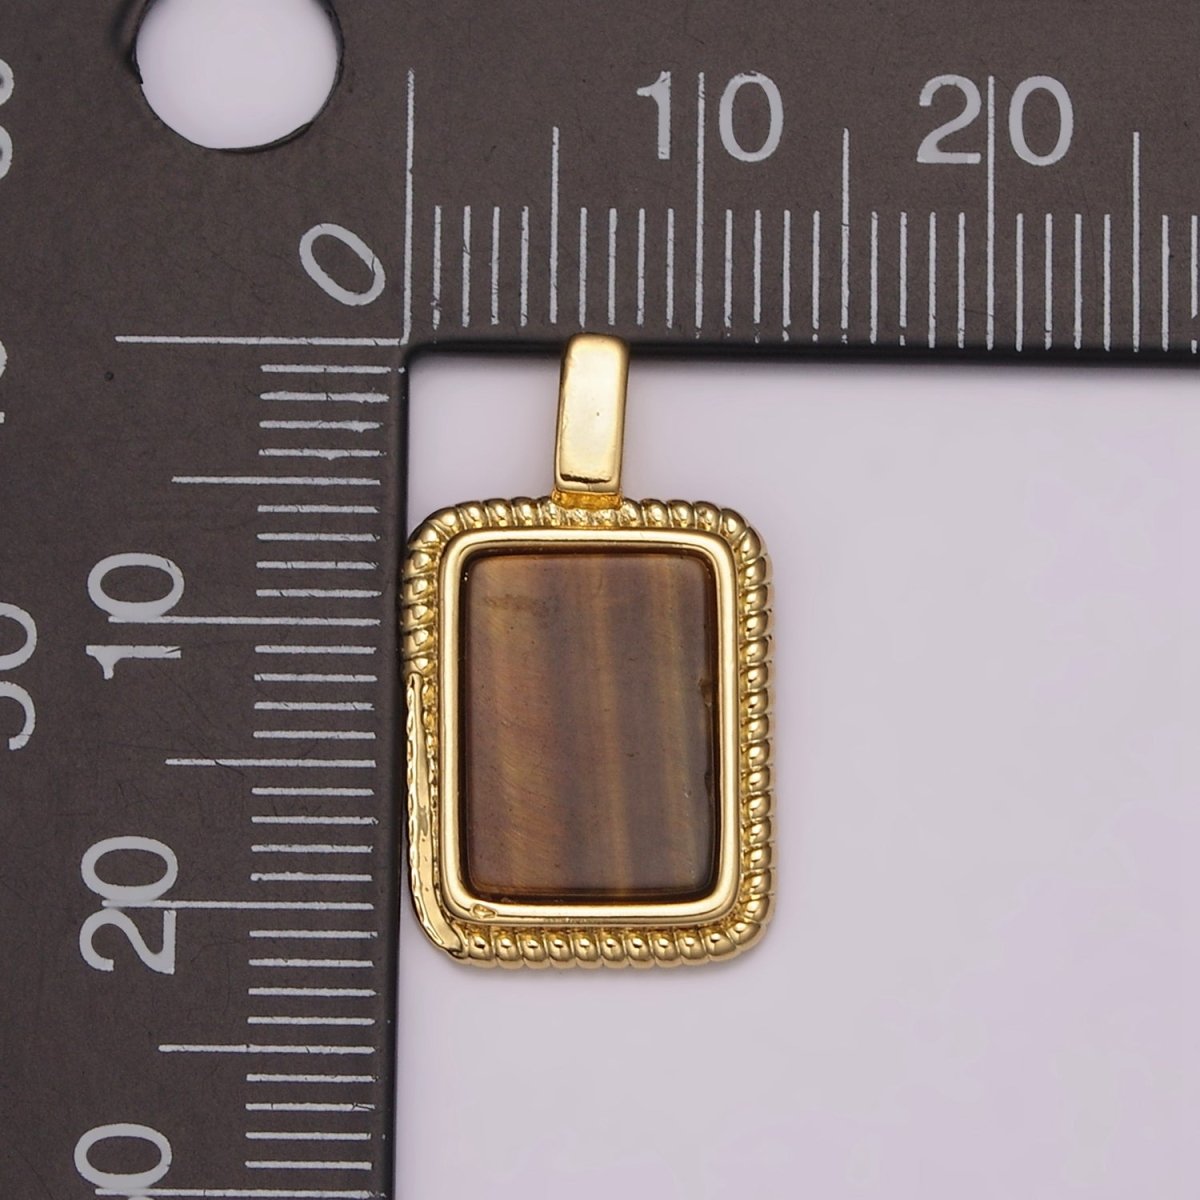 14K Yellow Gold Filled Square Gemstone Medallion Pendant Abalone, Tiger Eye, Carnelian, Black ,Green Agate for Vintage Classic Minimalist Jewelry N-473 - N-477 - DLUXCA